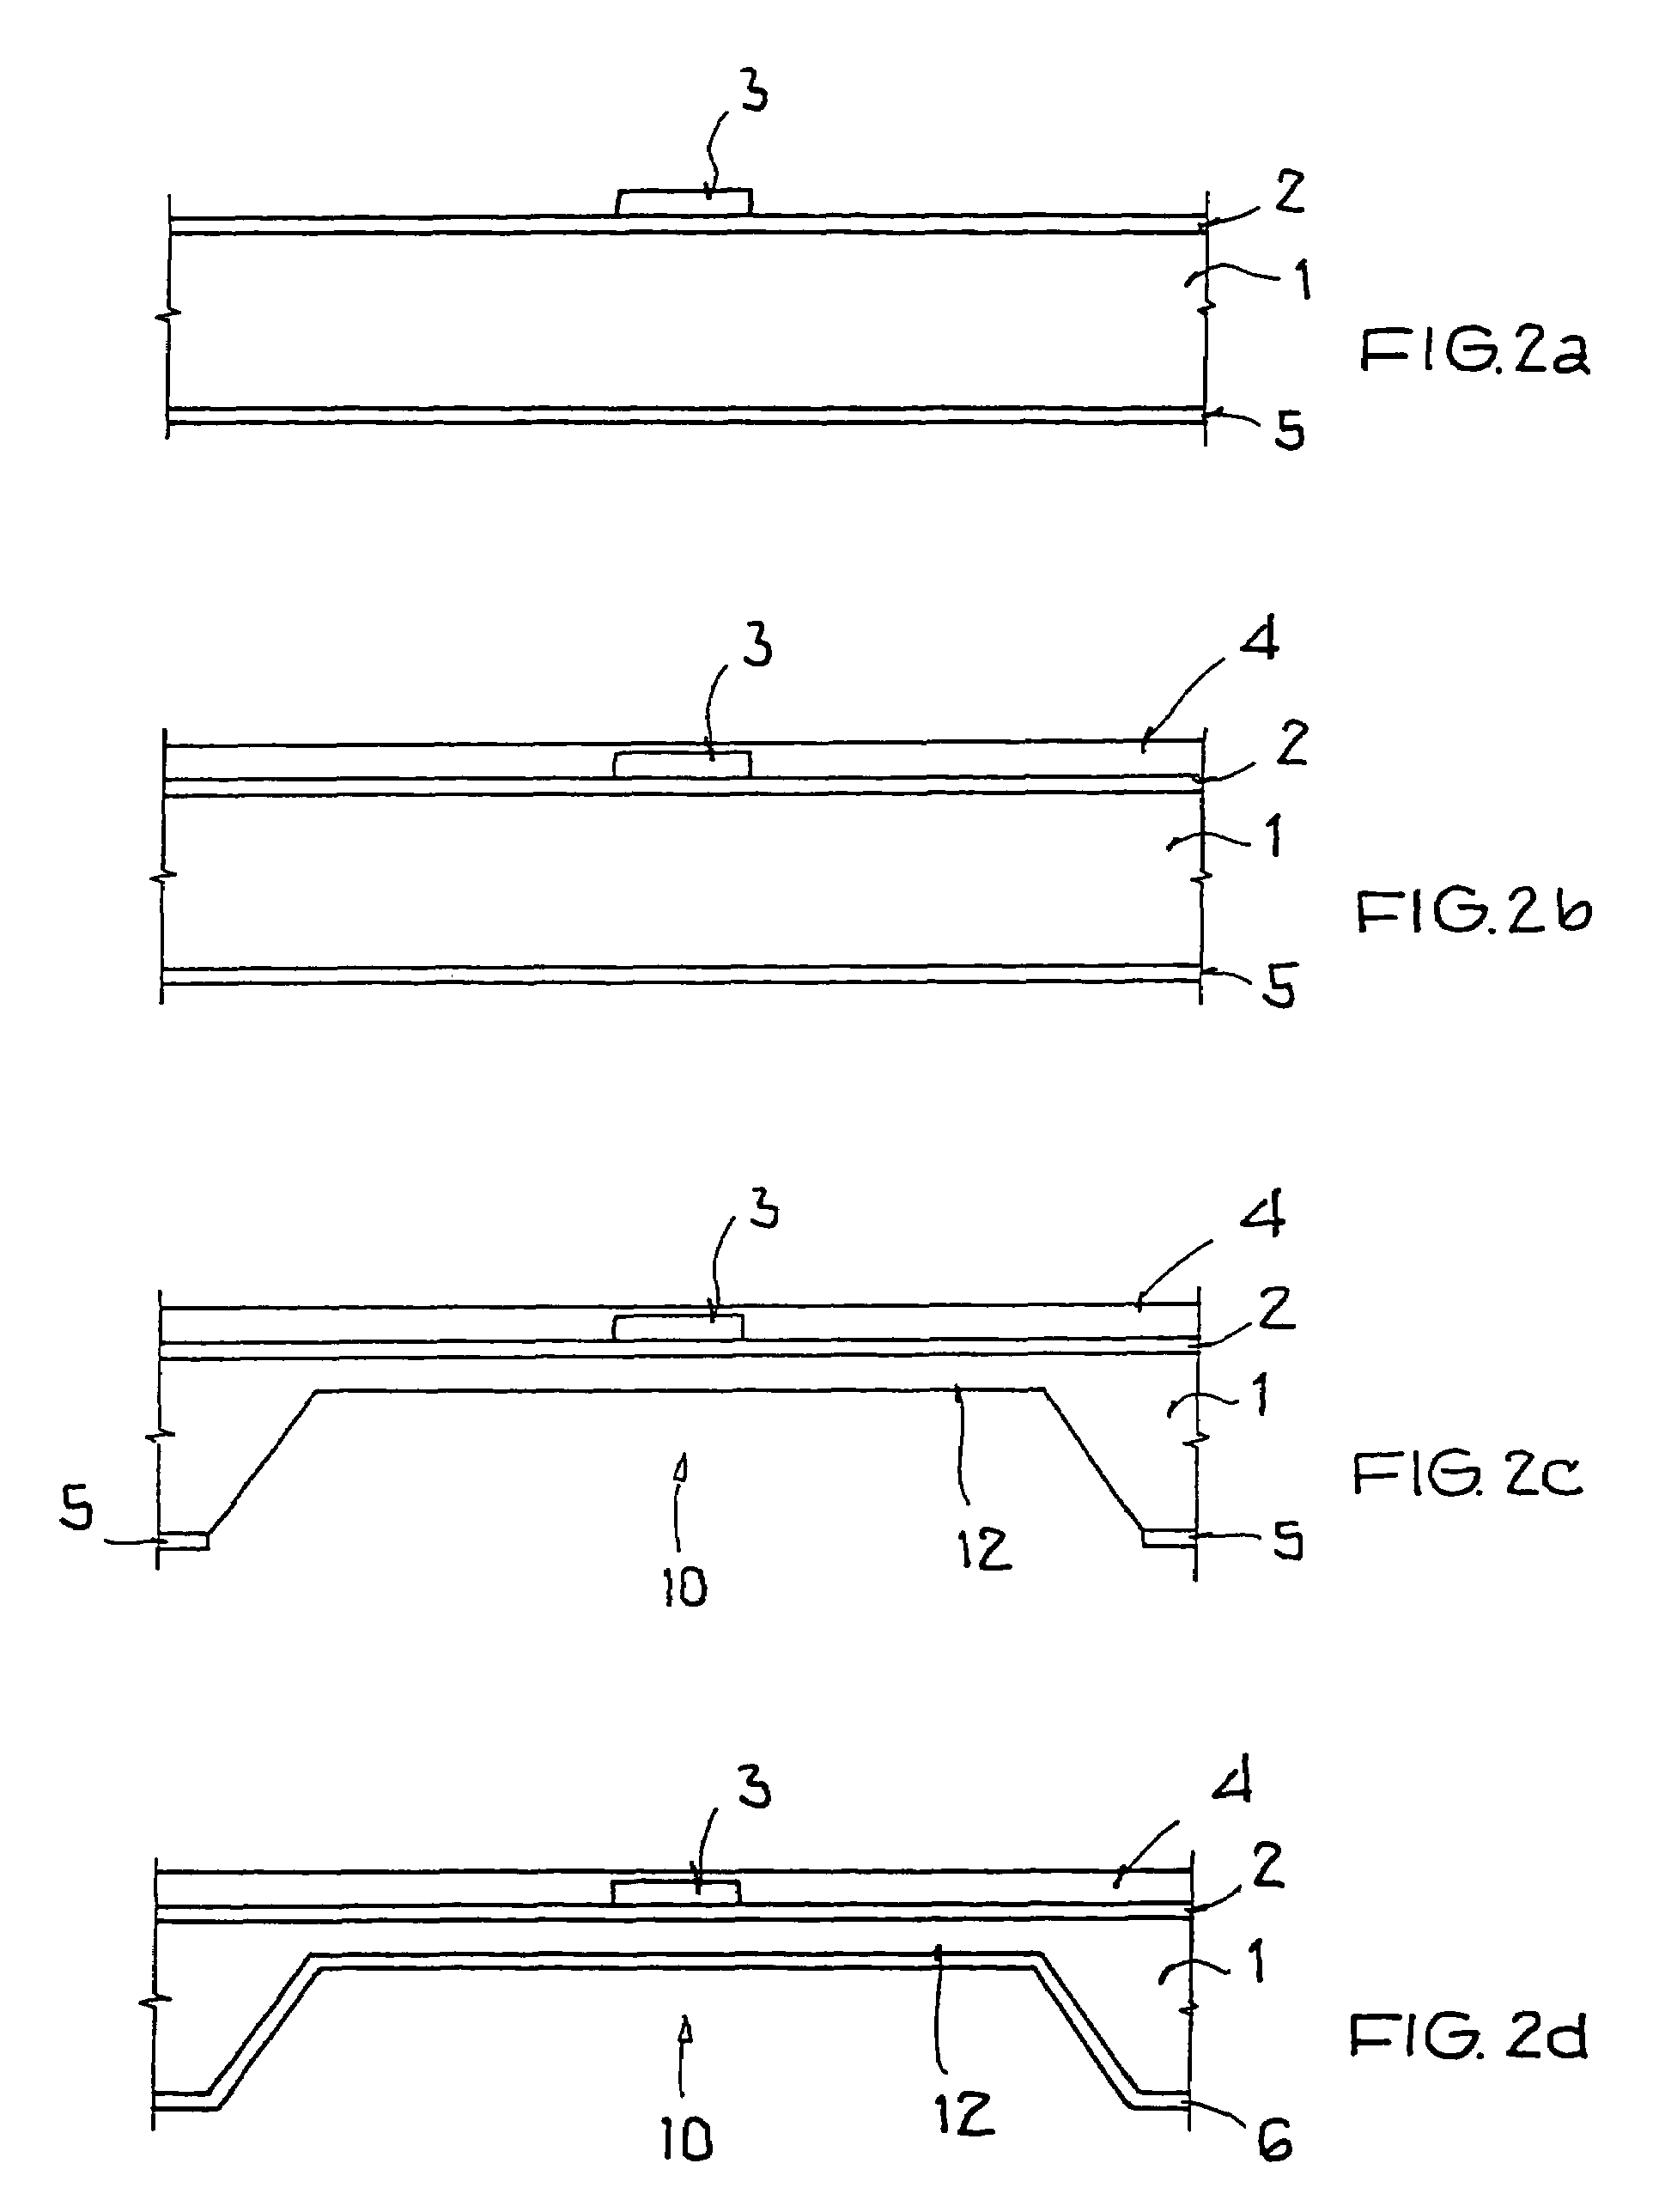 Method for producing a conductor path on a substrate, and a component having a conductor path fabricated in accordance with such a method